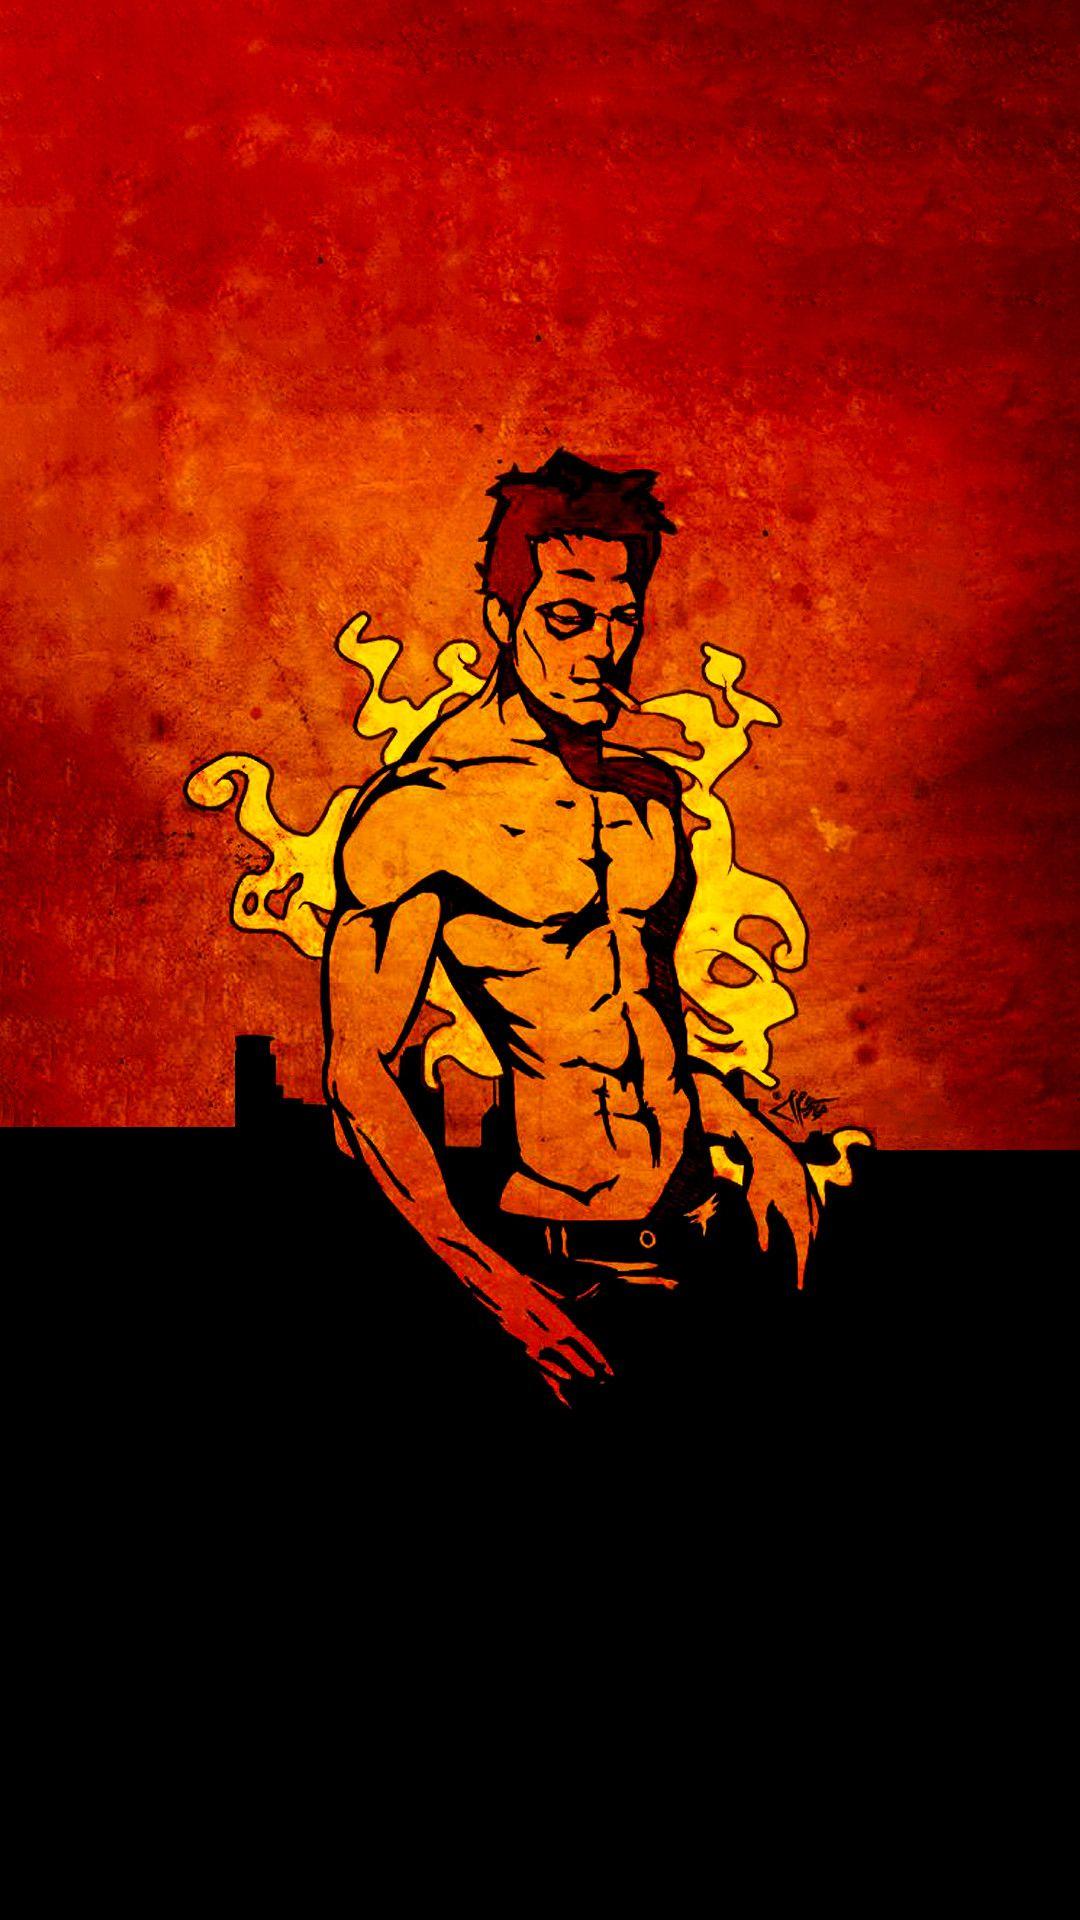 Fight Club Wallpapers Top Free Fight Club Backgrounds Images, Photos, Reviews